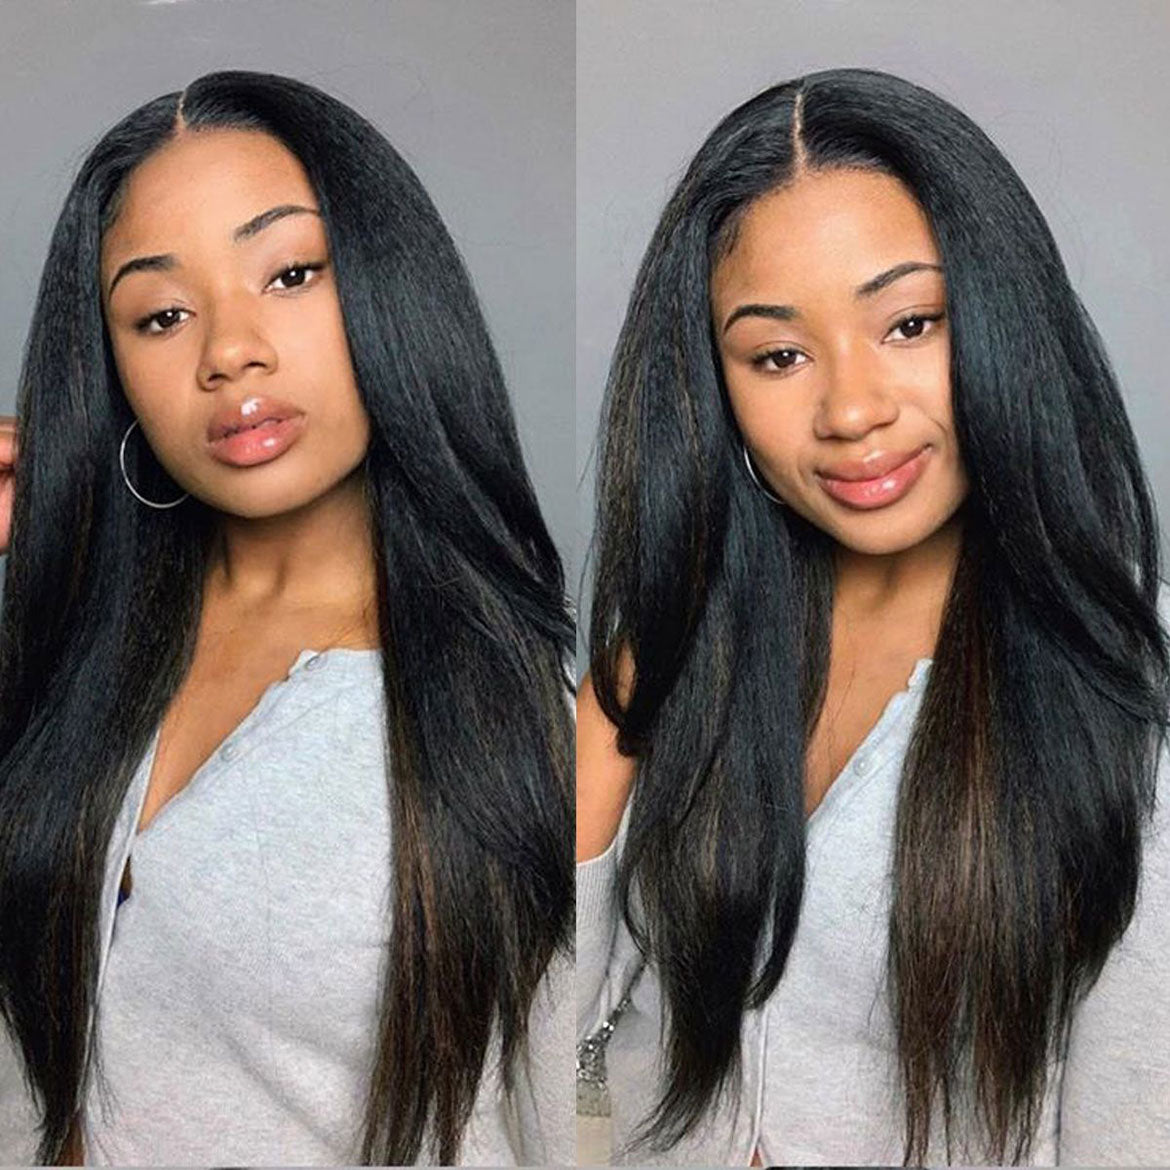 VRBest Affordable 4x4 Lace Closure Wigs Kinky Straight Human Hair Wigs